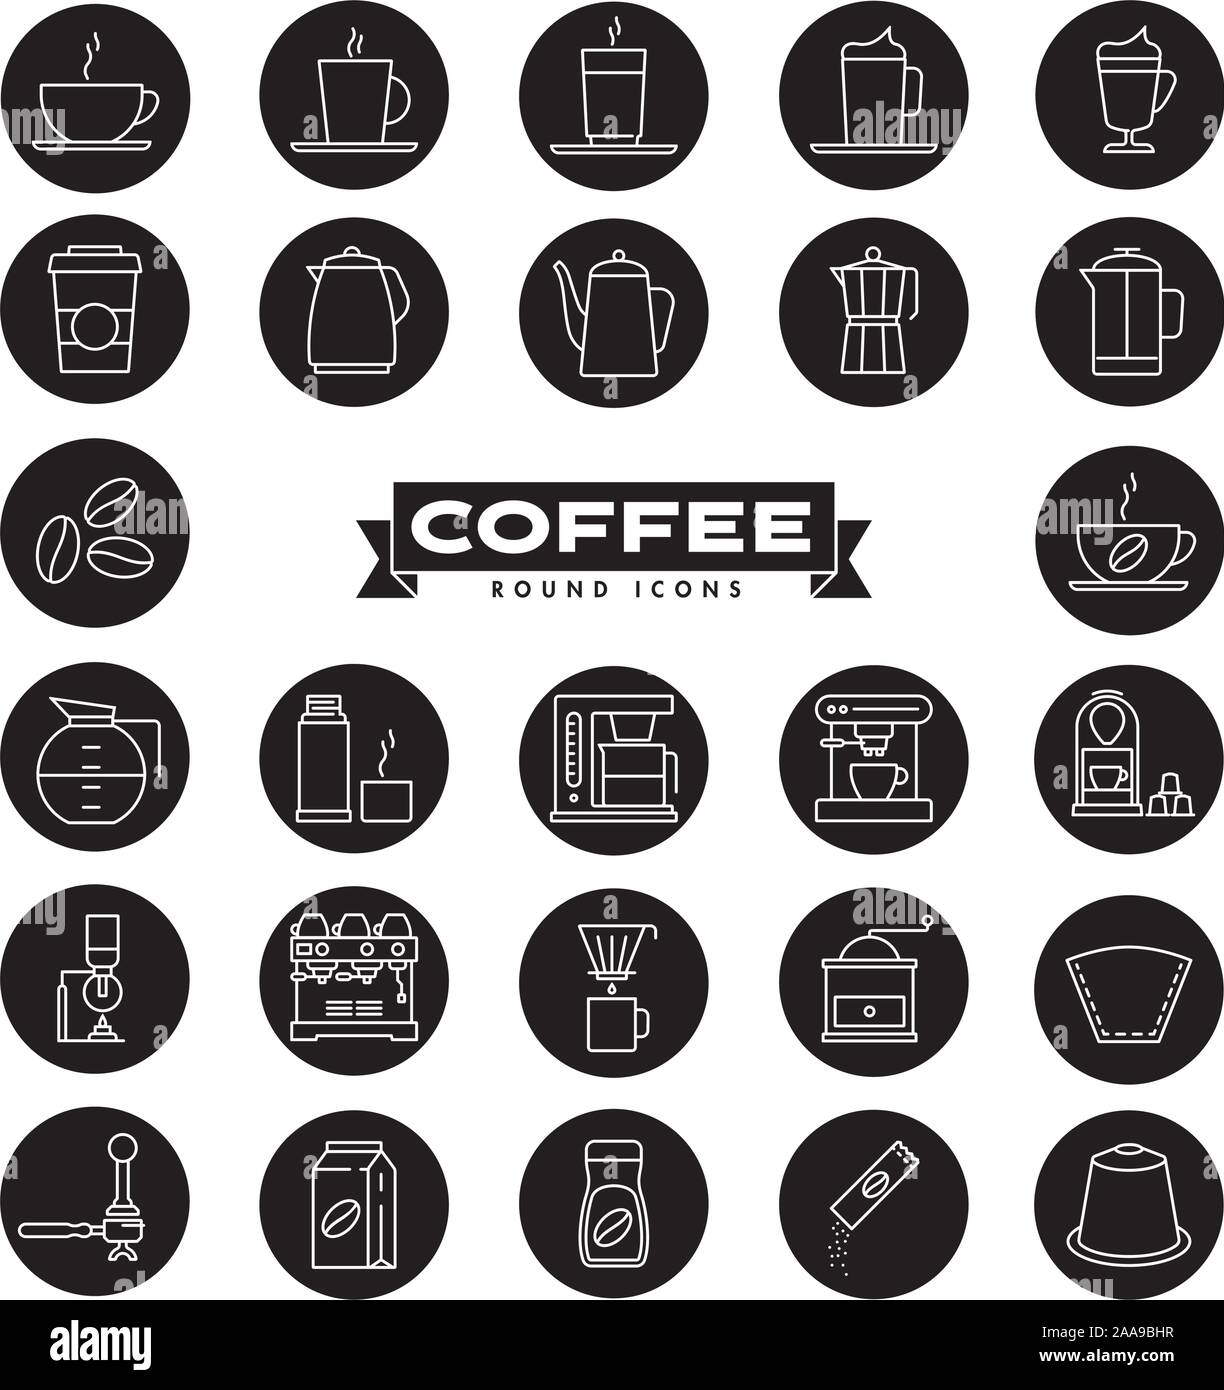 Coffee vector round icons set. Collection of symbols related to coffee preparation and drinking. Stock Vector